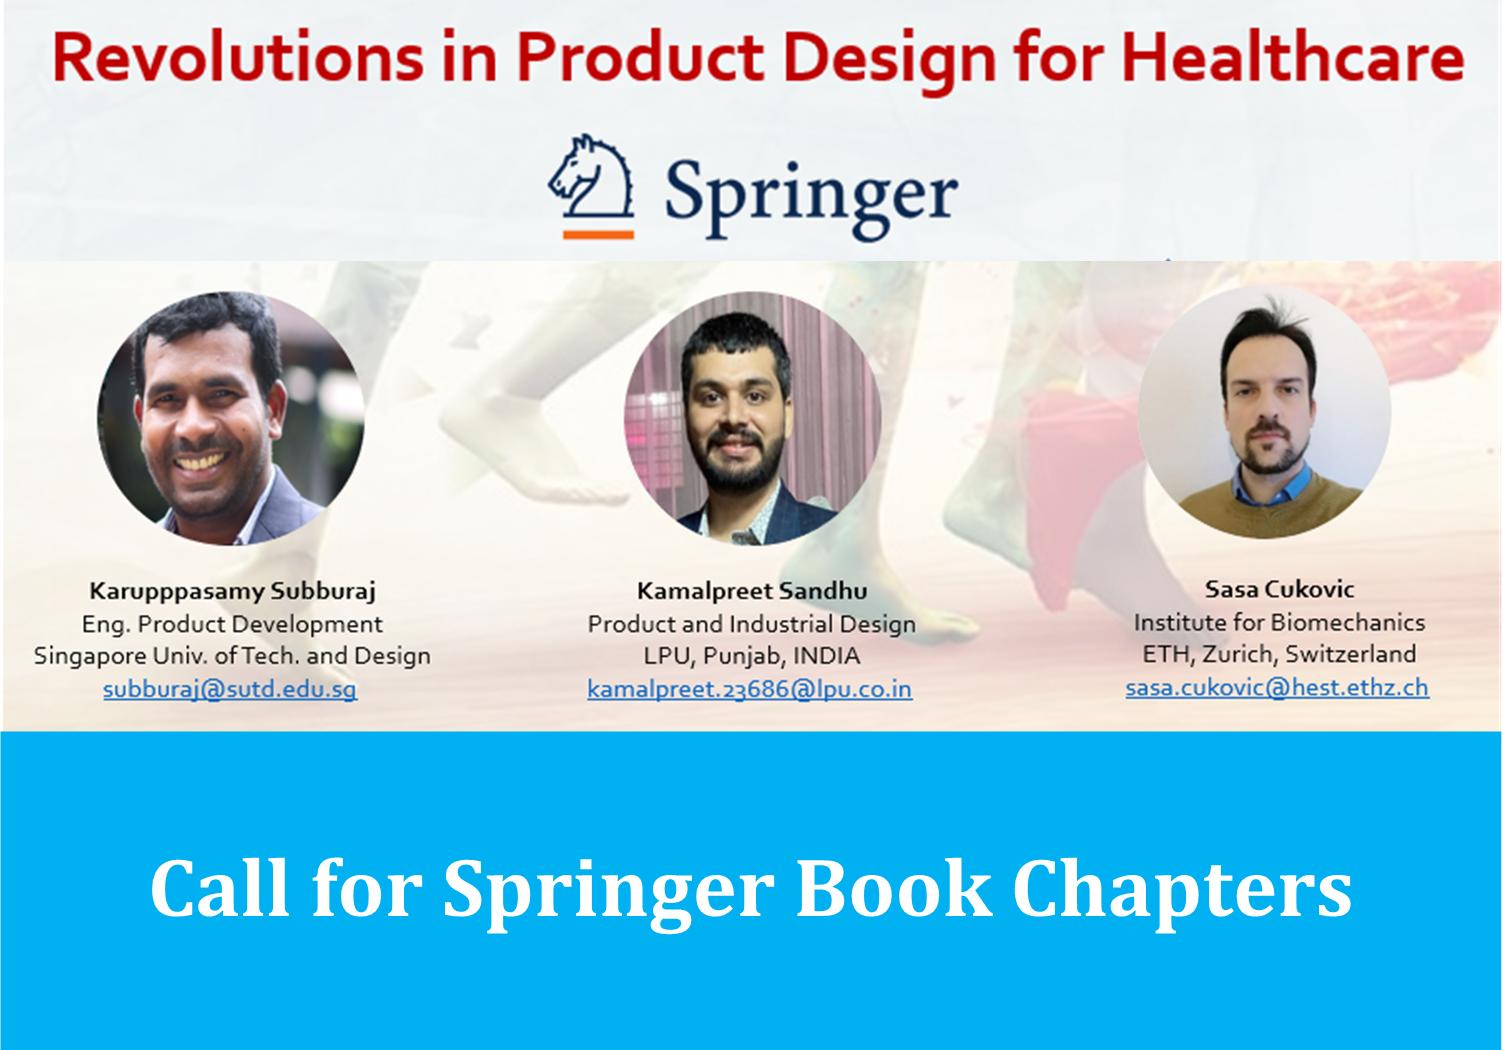 Call for Book Chapters "Revolutions in Product Design for Healthcare